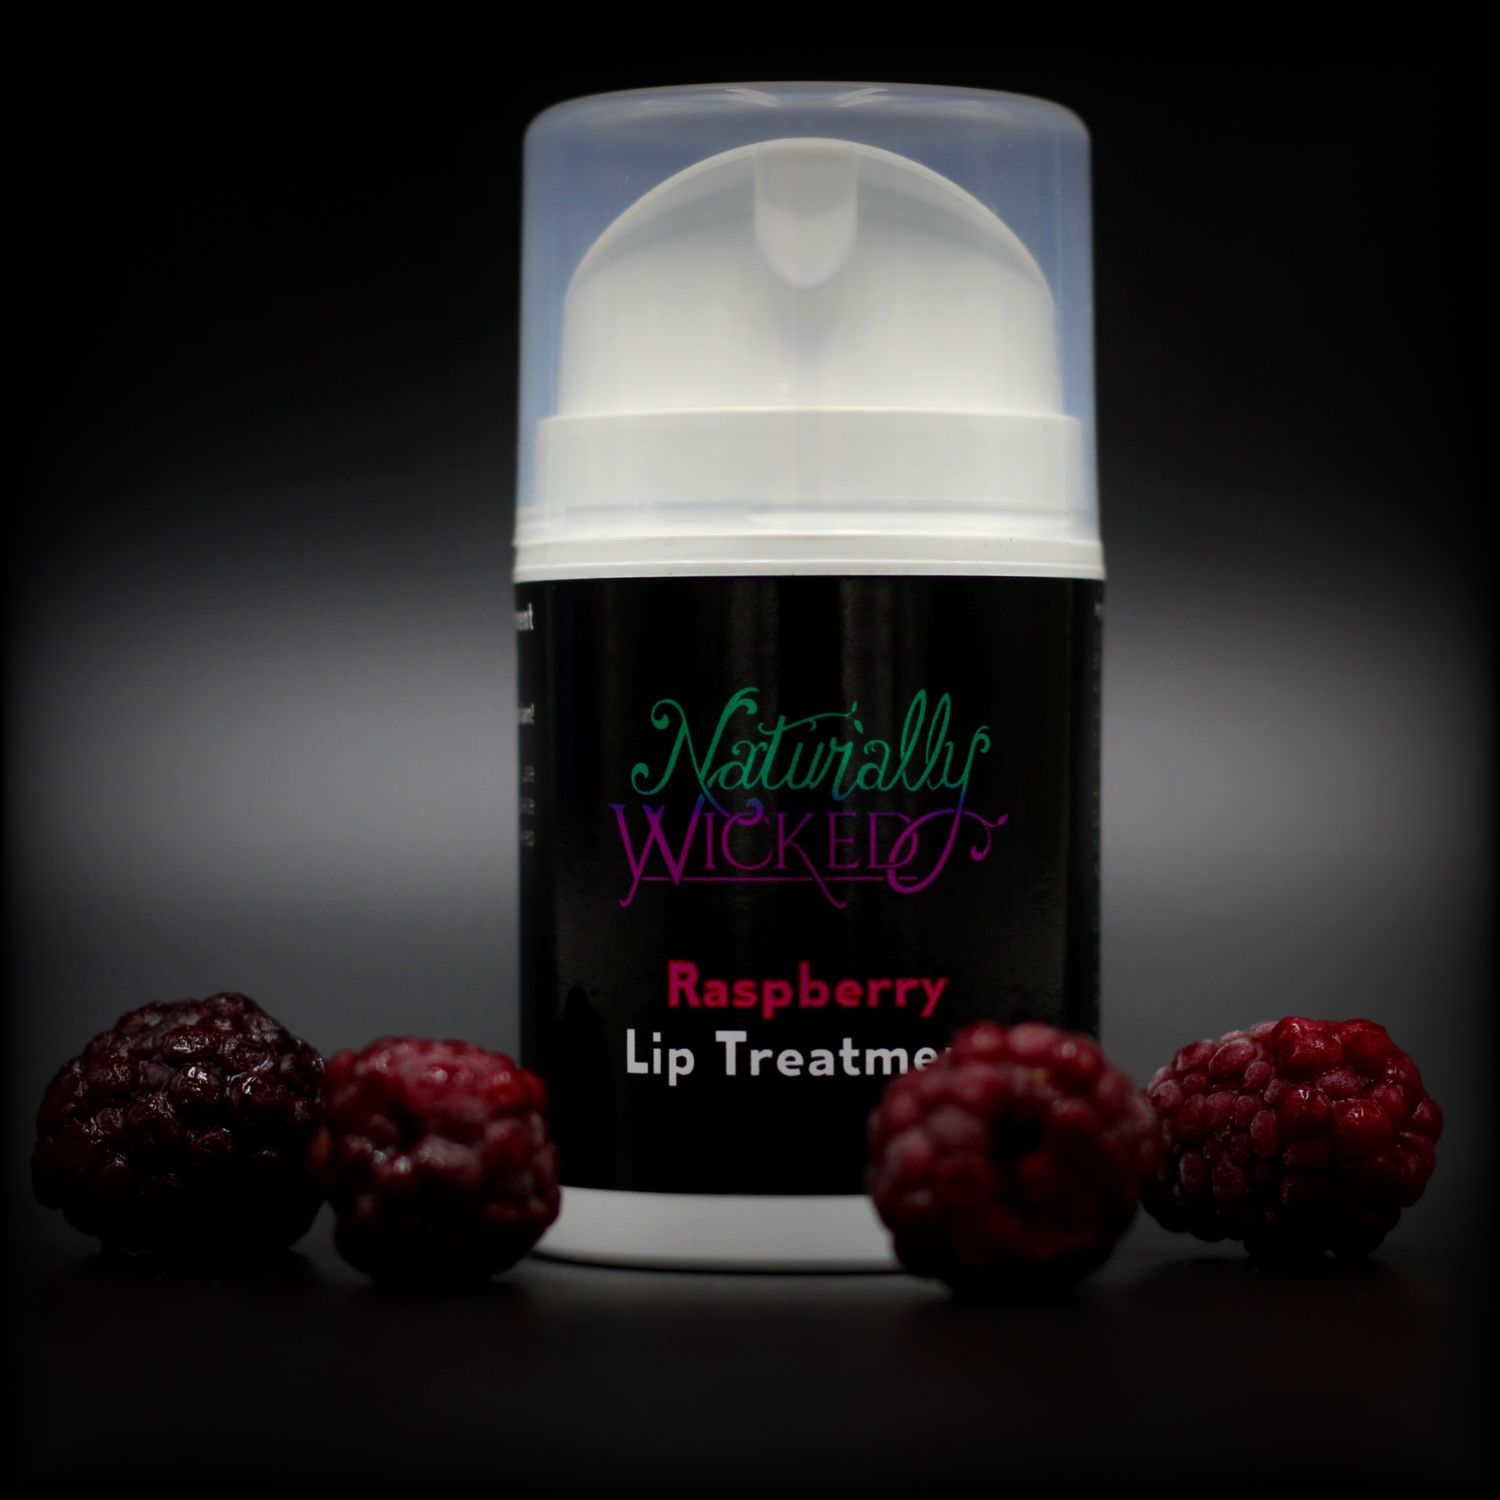 Naturally Wicked Raspberry Lip Treatment Surrounded By Dark Red Luscious Raspberries